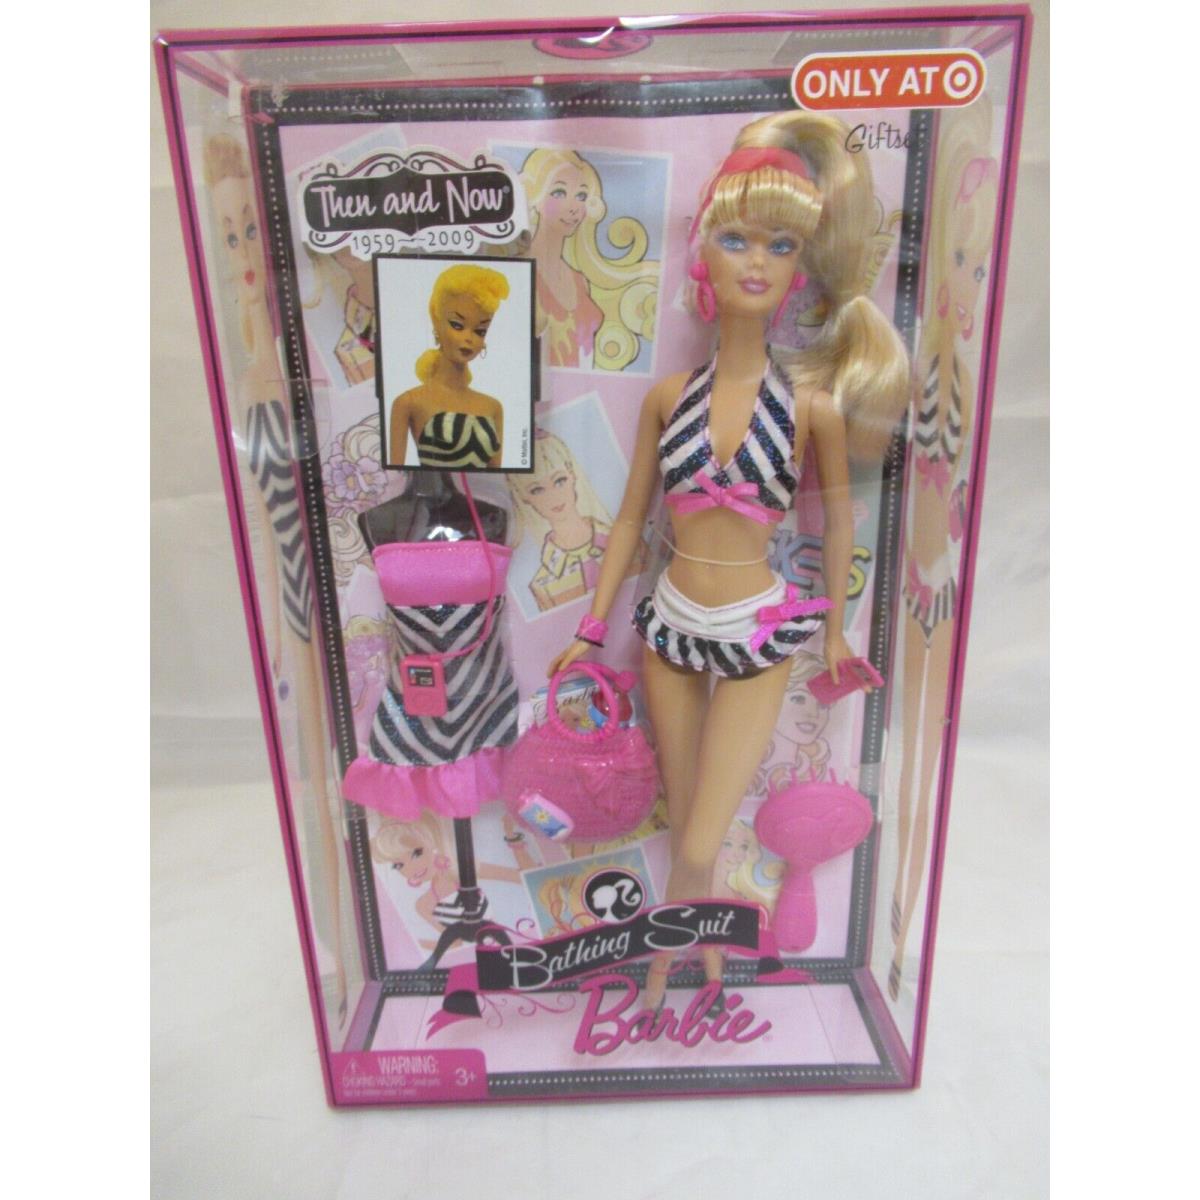 2008 Bathing Suit Then and Now Barbie 50th Anniversary Target Exclusive - Mib